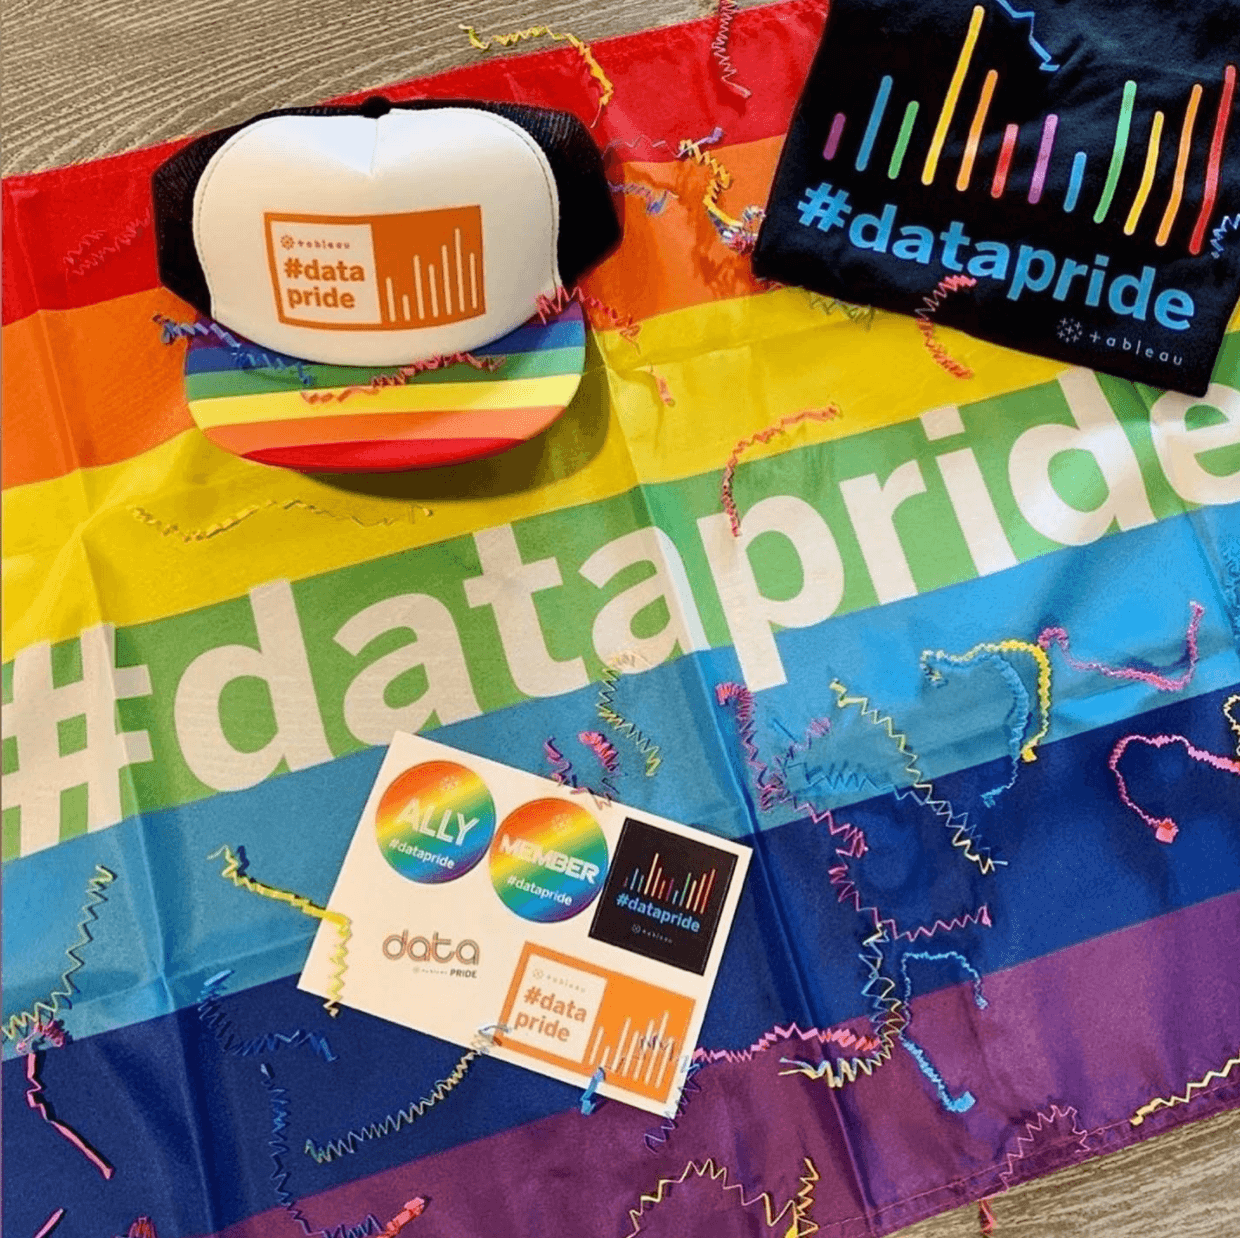 Tableau Pride gear including hat, flag, T-shirt, and stickers